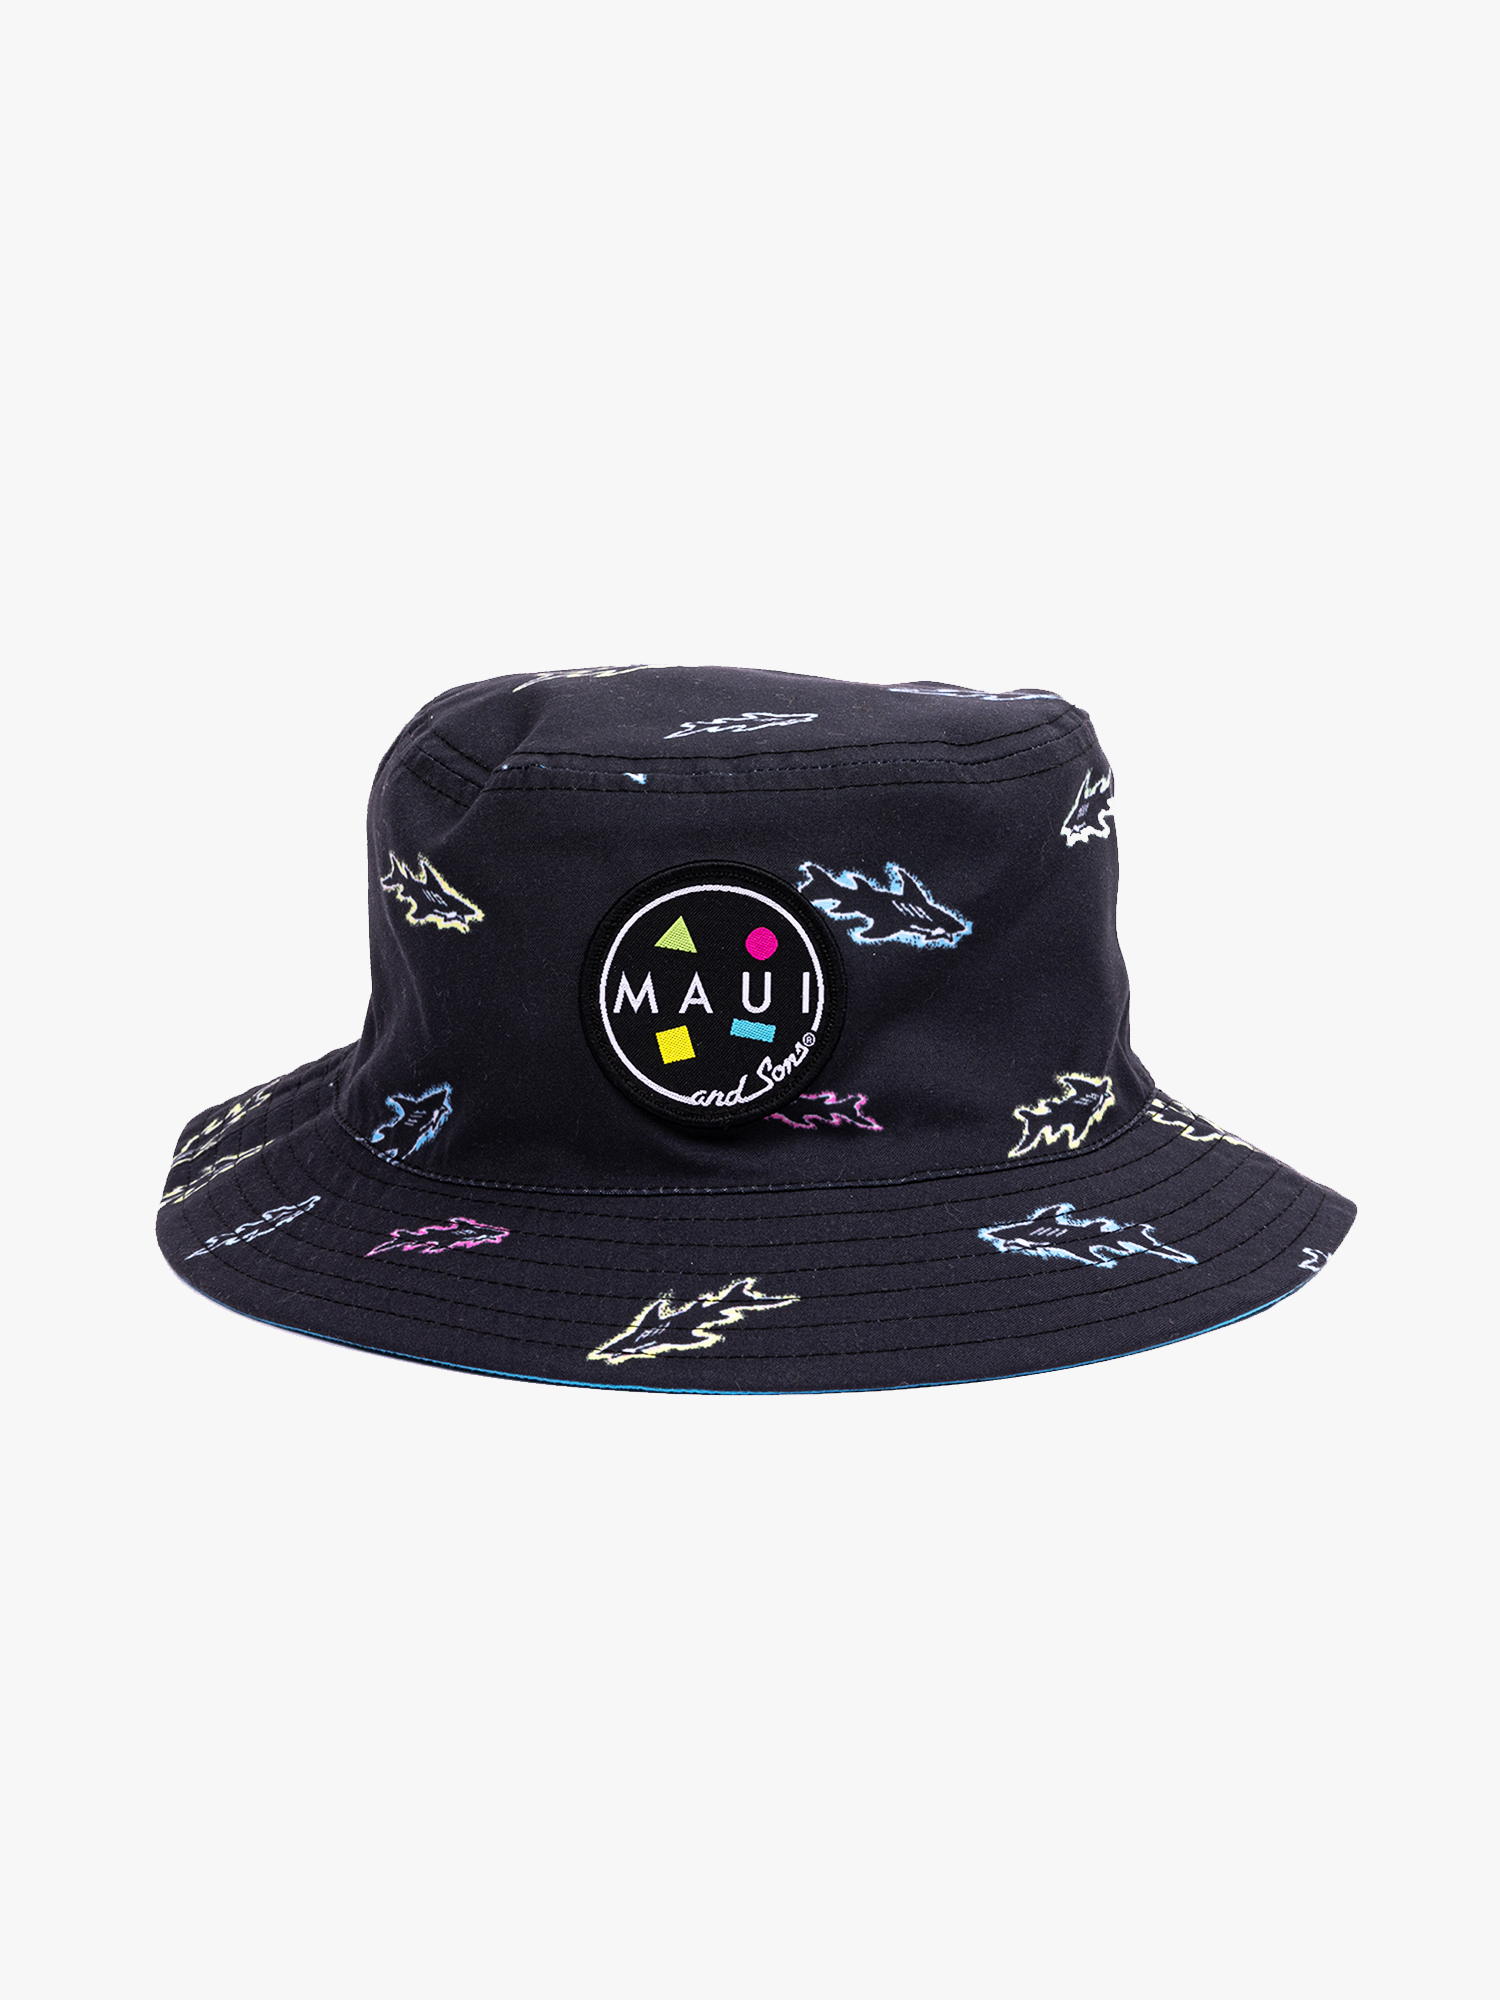 Anarchy Bucket Hat Black with Black/Red Script Patch: In-stoc